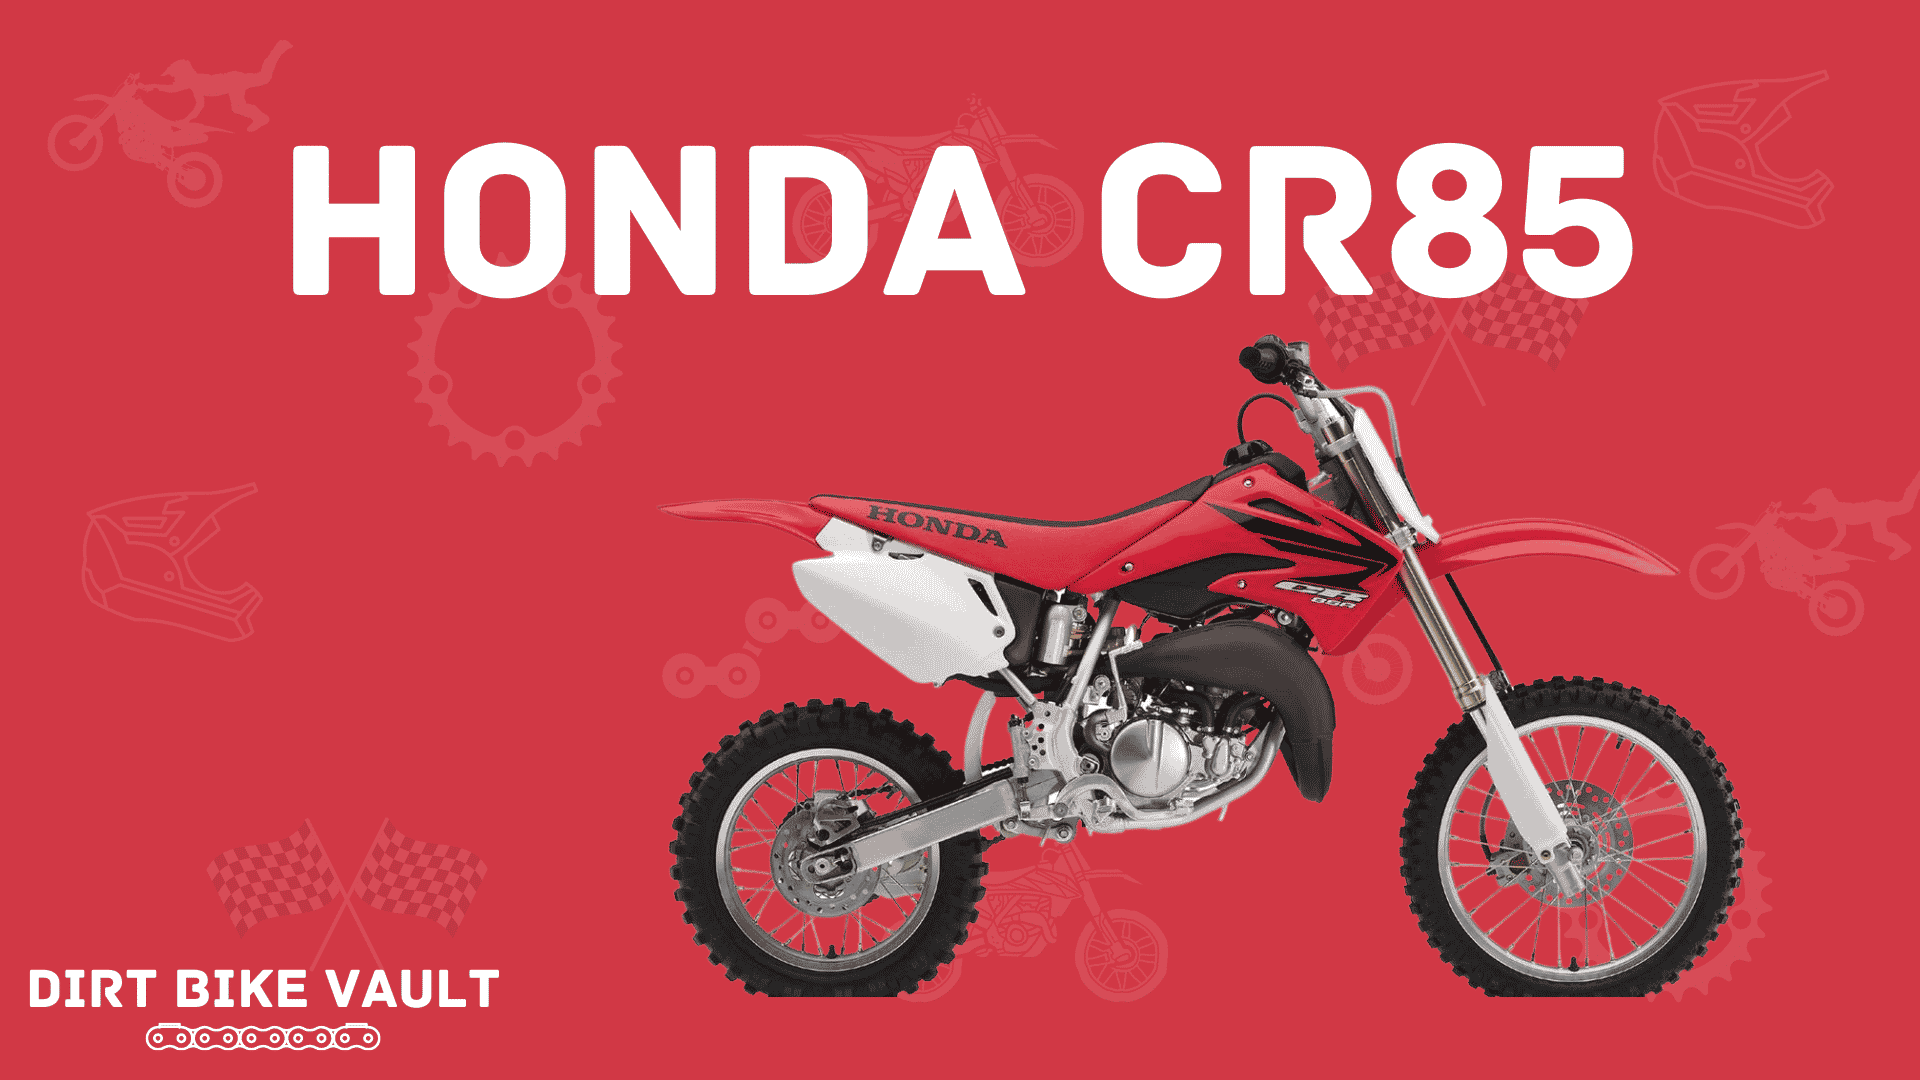 Honda CR 85 in white text with image of CR 85 dirt bike on red background